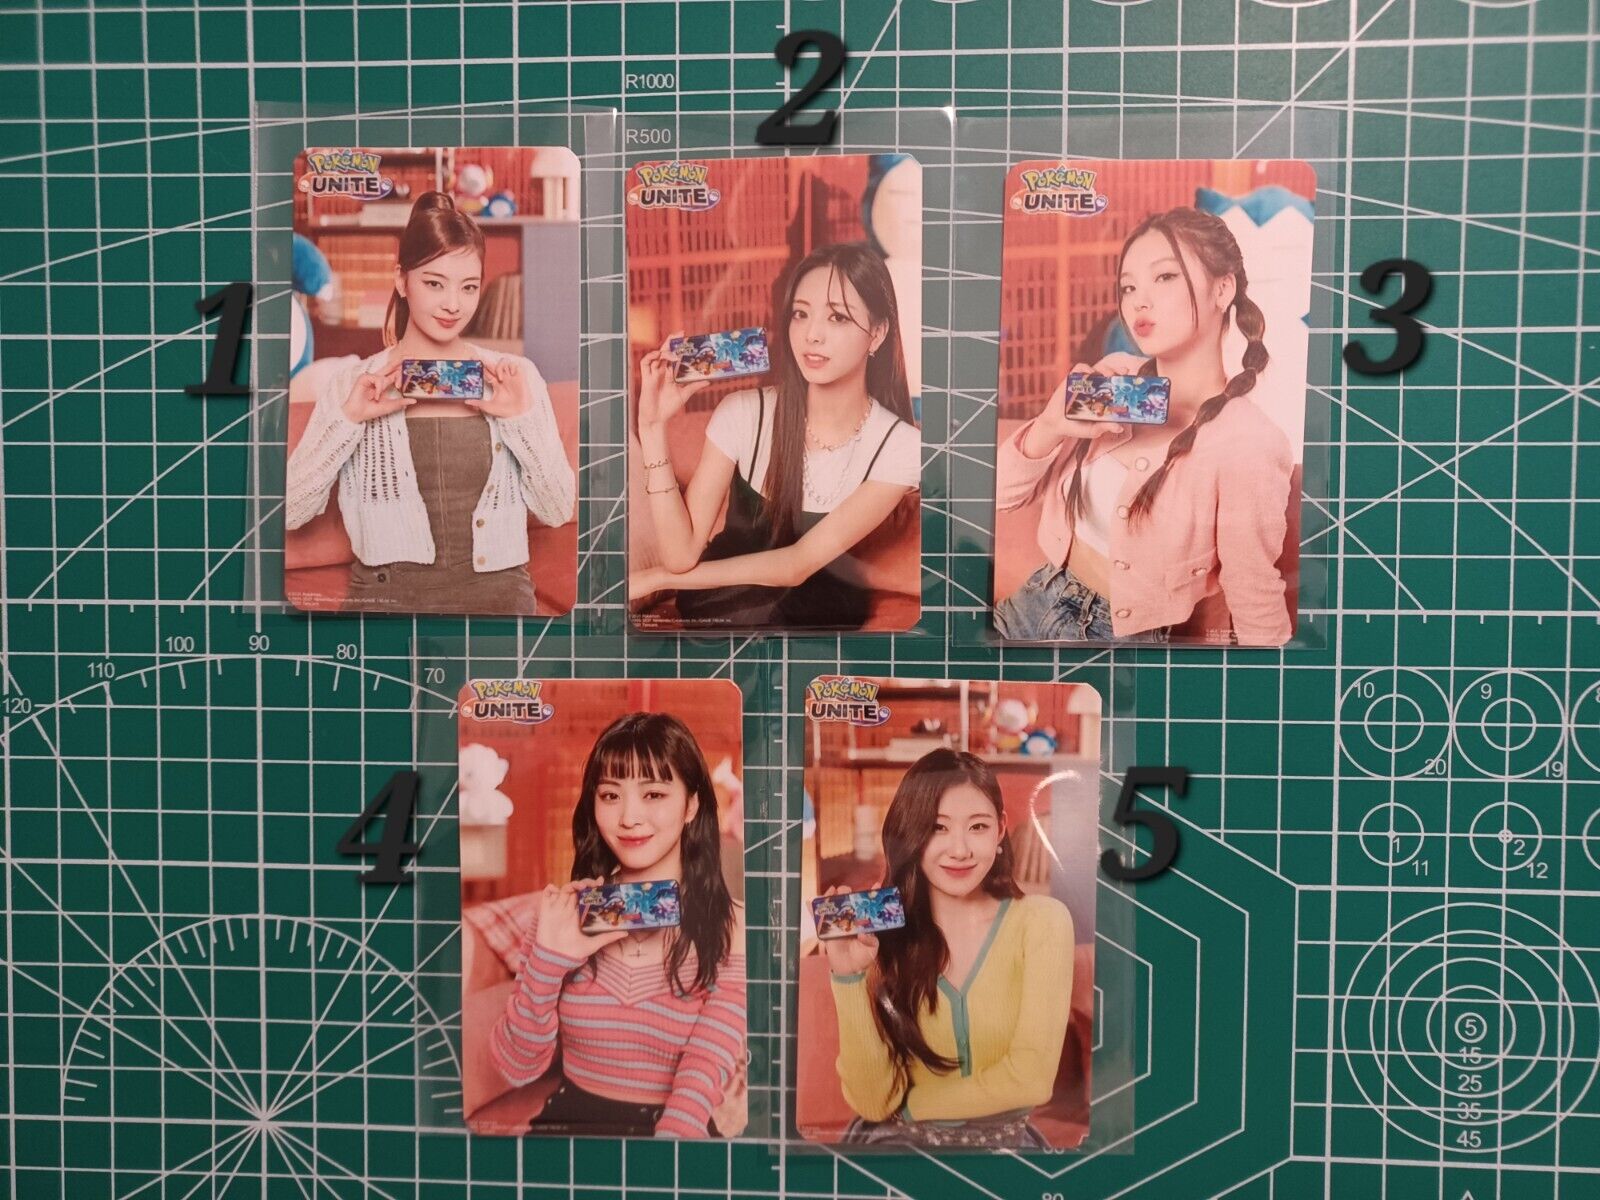 Pokemon Unite Itzy Individual Photocards (ALL FAN MADE)